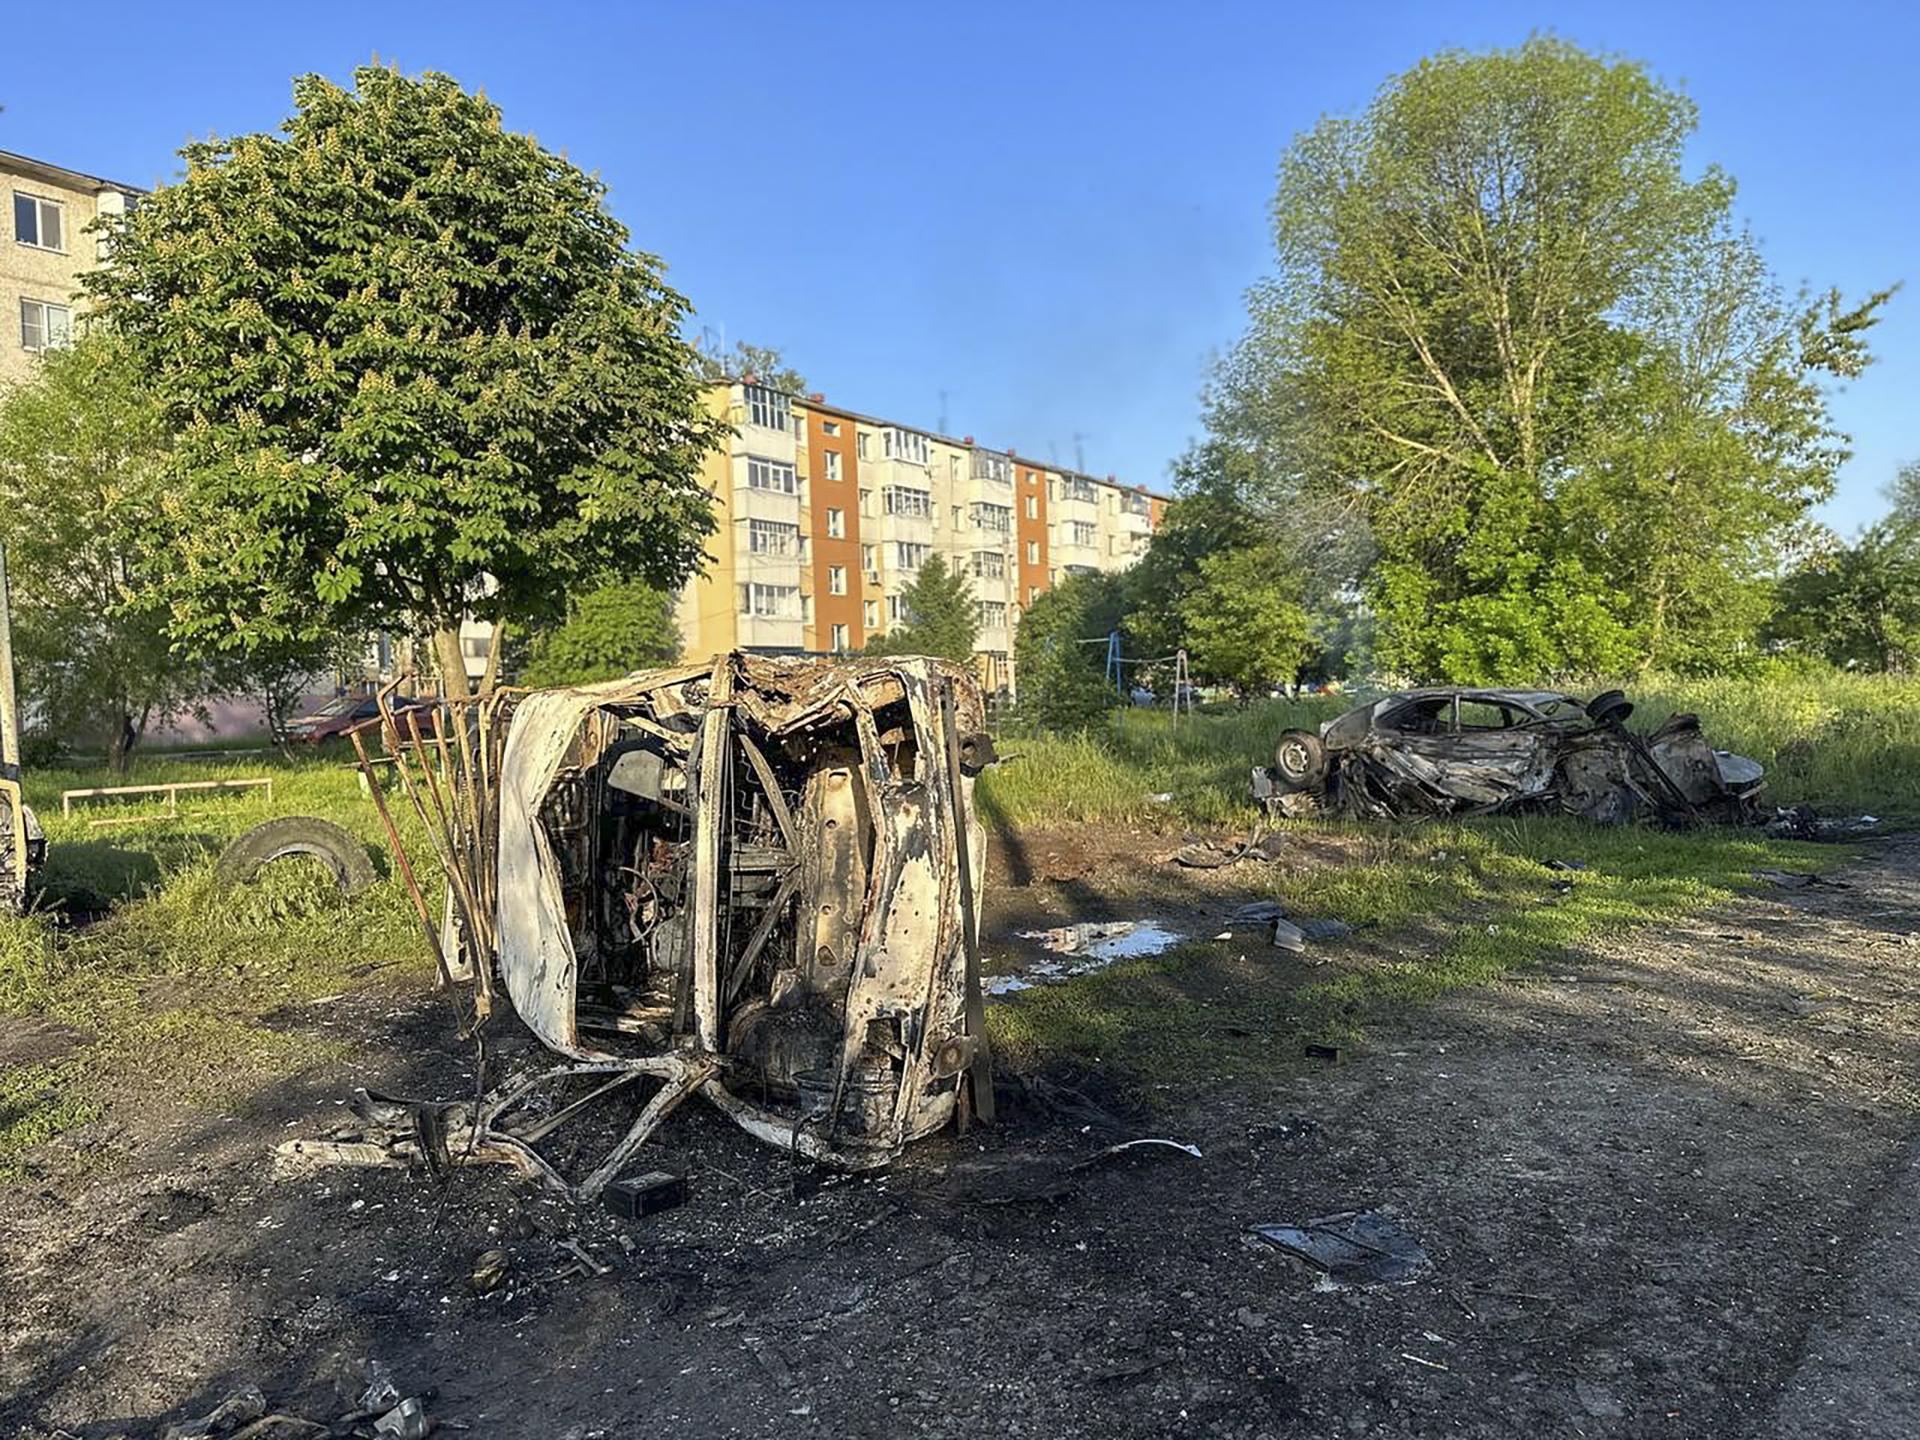 A handout photo made available by the Governor of Russia's Belgorod region Vyacheslav Gladkov on his Telegram channel shows the aftermath of Ukrainian shelling in the border town of Shebekino, Belgorod region, Russia, 31 May 2023. EFE/EPA/GOVERNOR OF BELGOROD REGION/HANDOUT HANDOUT HANDOUT EDITORIAL USE ONLY/NO SALES HANDOUT EDITORIAL USE ONLY/NO SALES